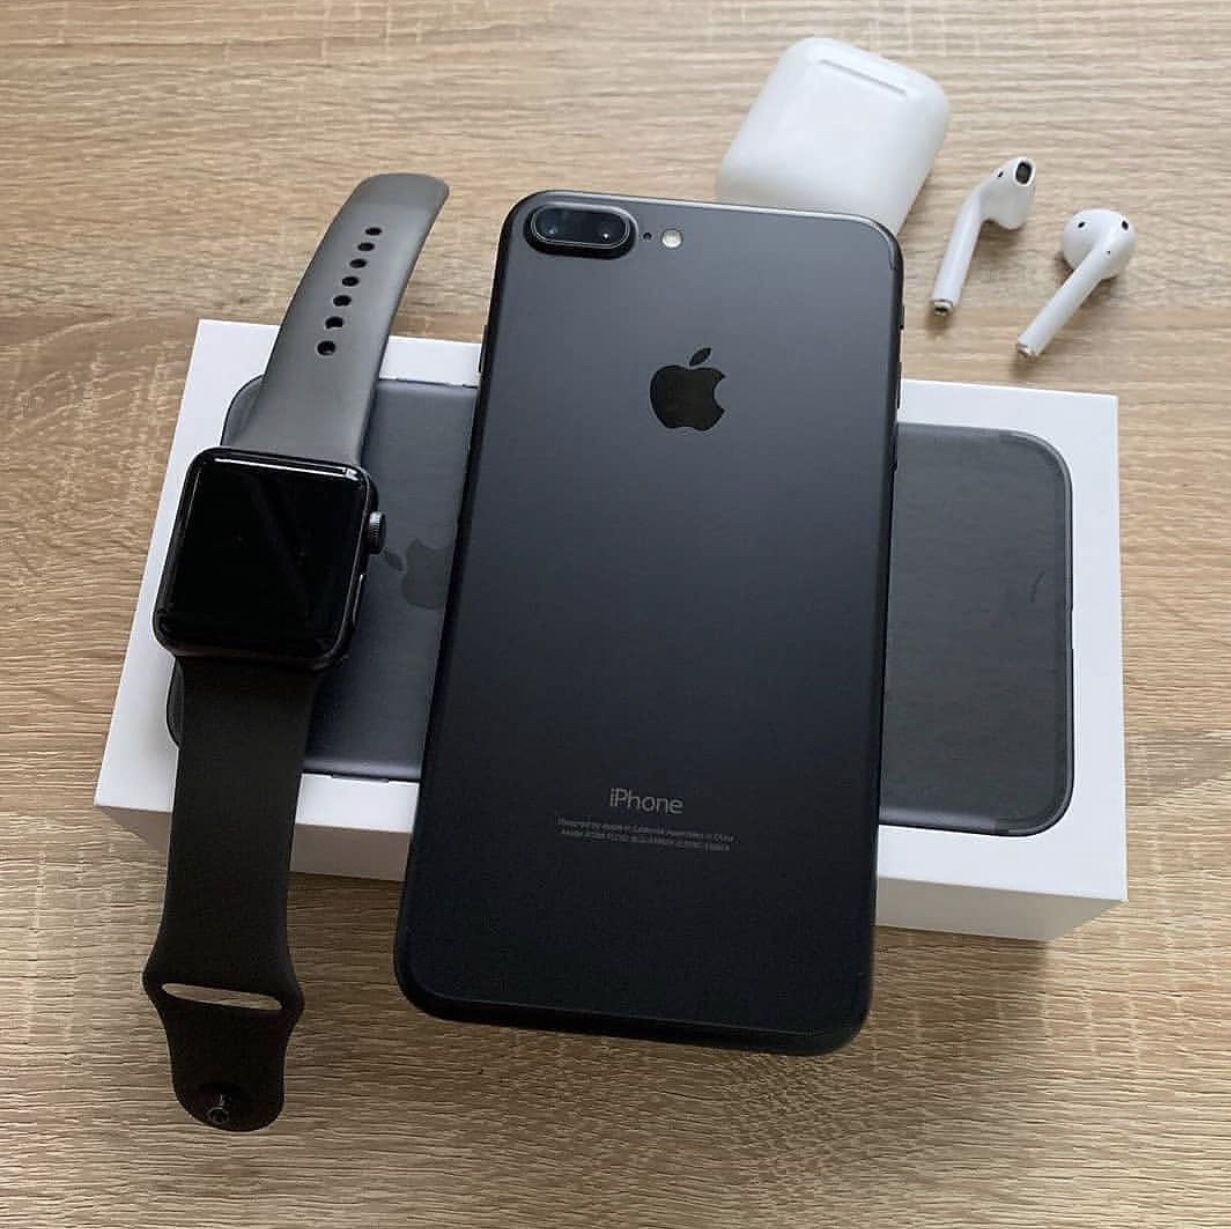 iPhone 7 Plus , Apple Watch , A set of Airpods